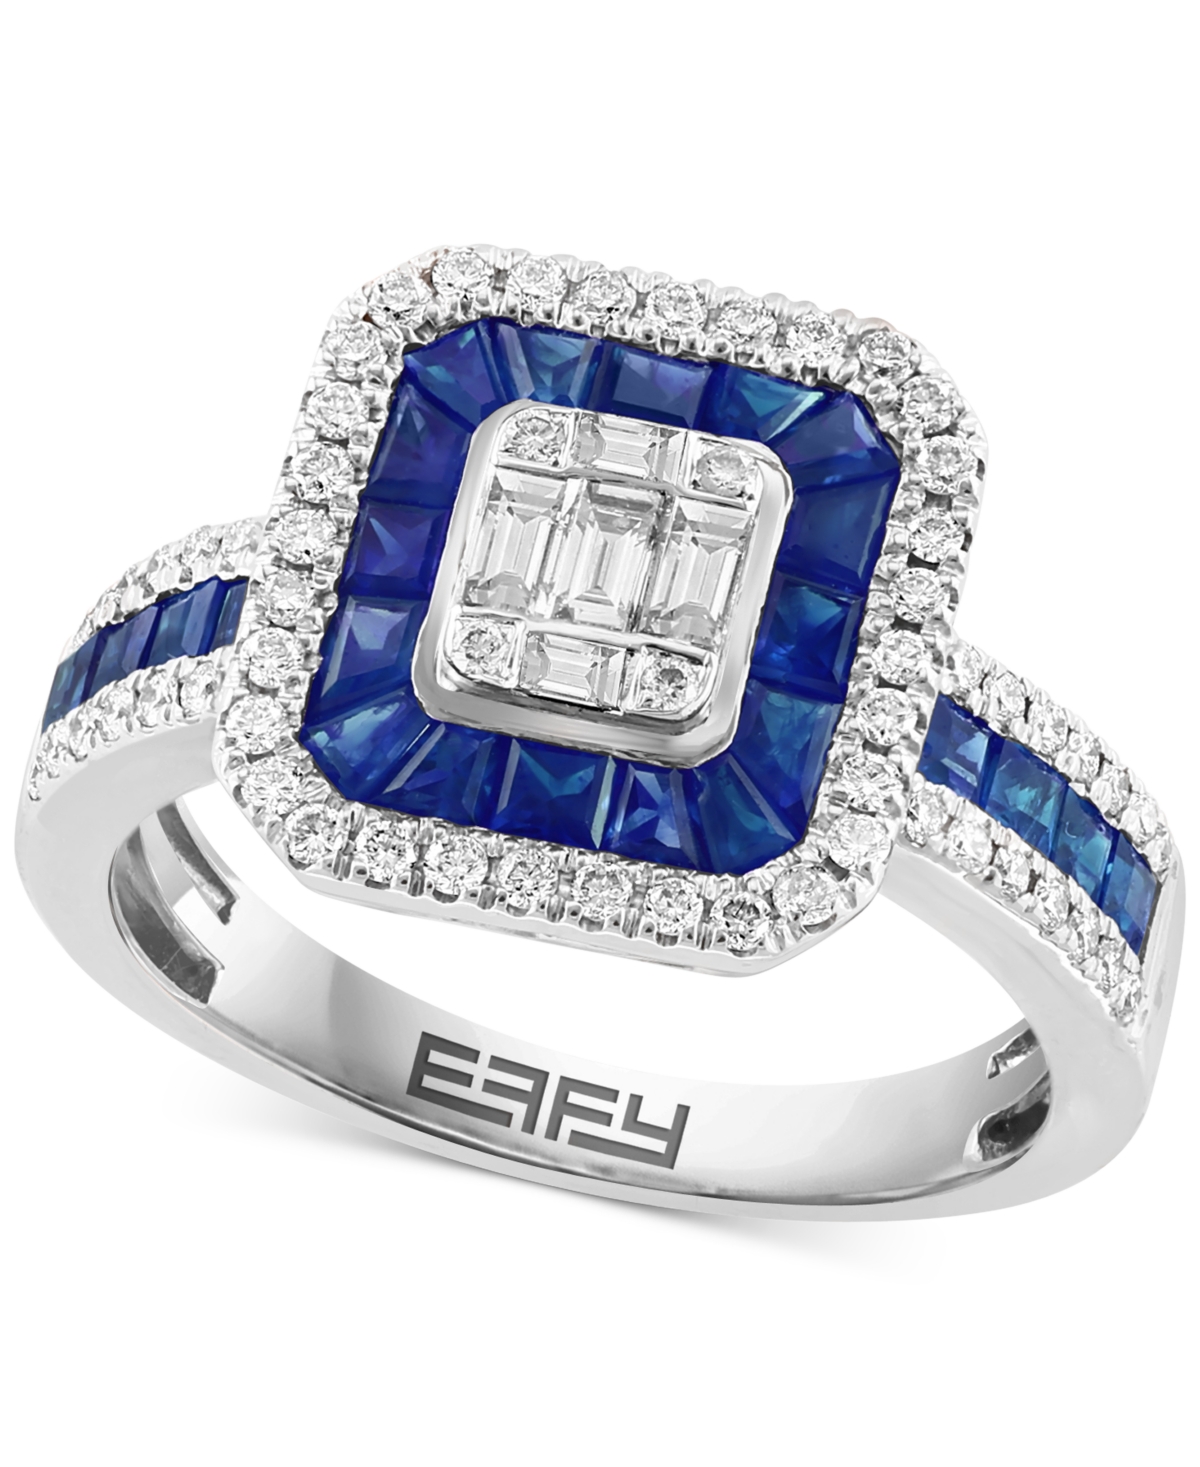 Effy Sapphire (1-1/20 ct. t.w.) & Diamond (1/2 ct. t.w.) Halo Cluster Ring in 14k White Gold - K White Gold